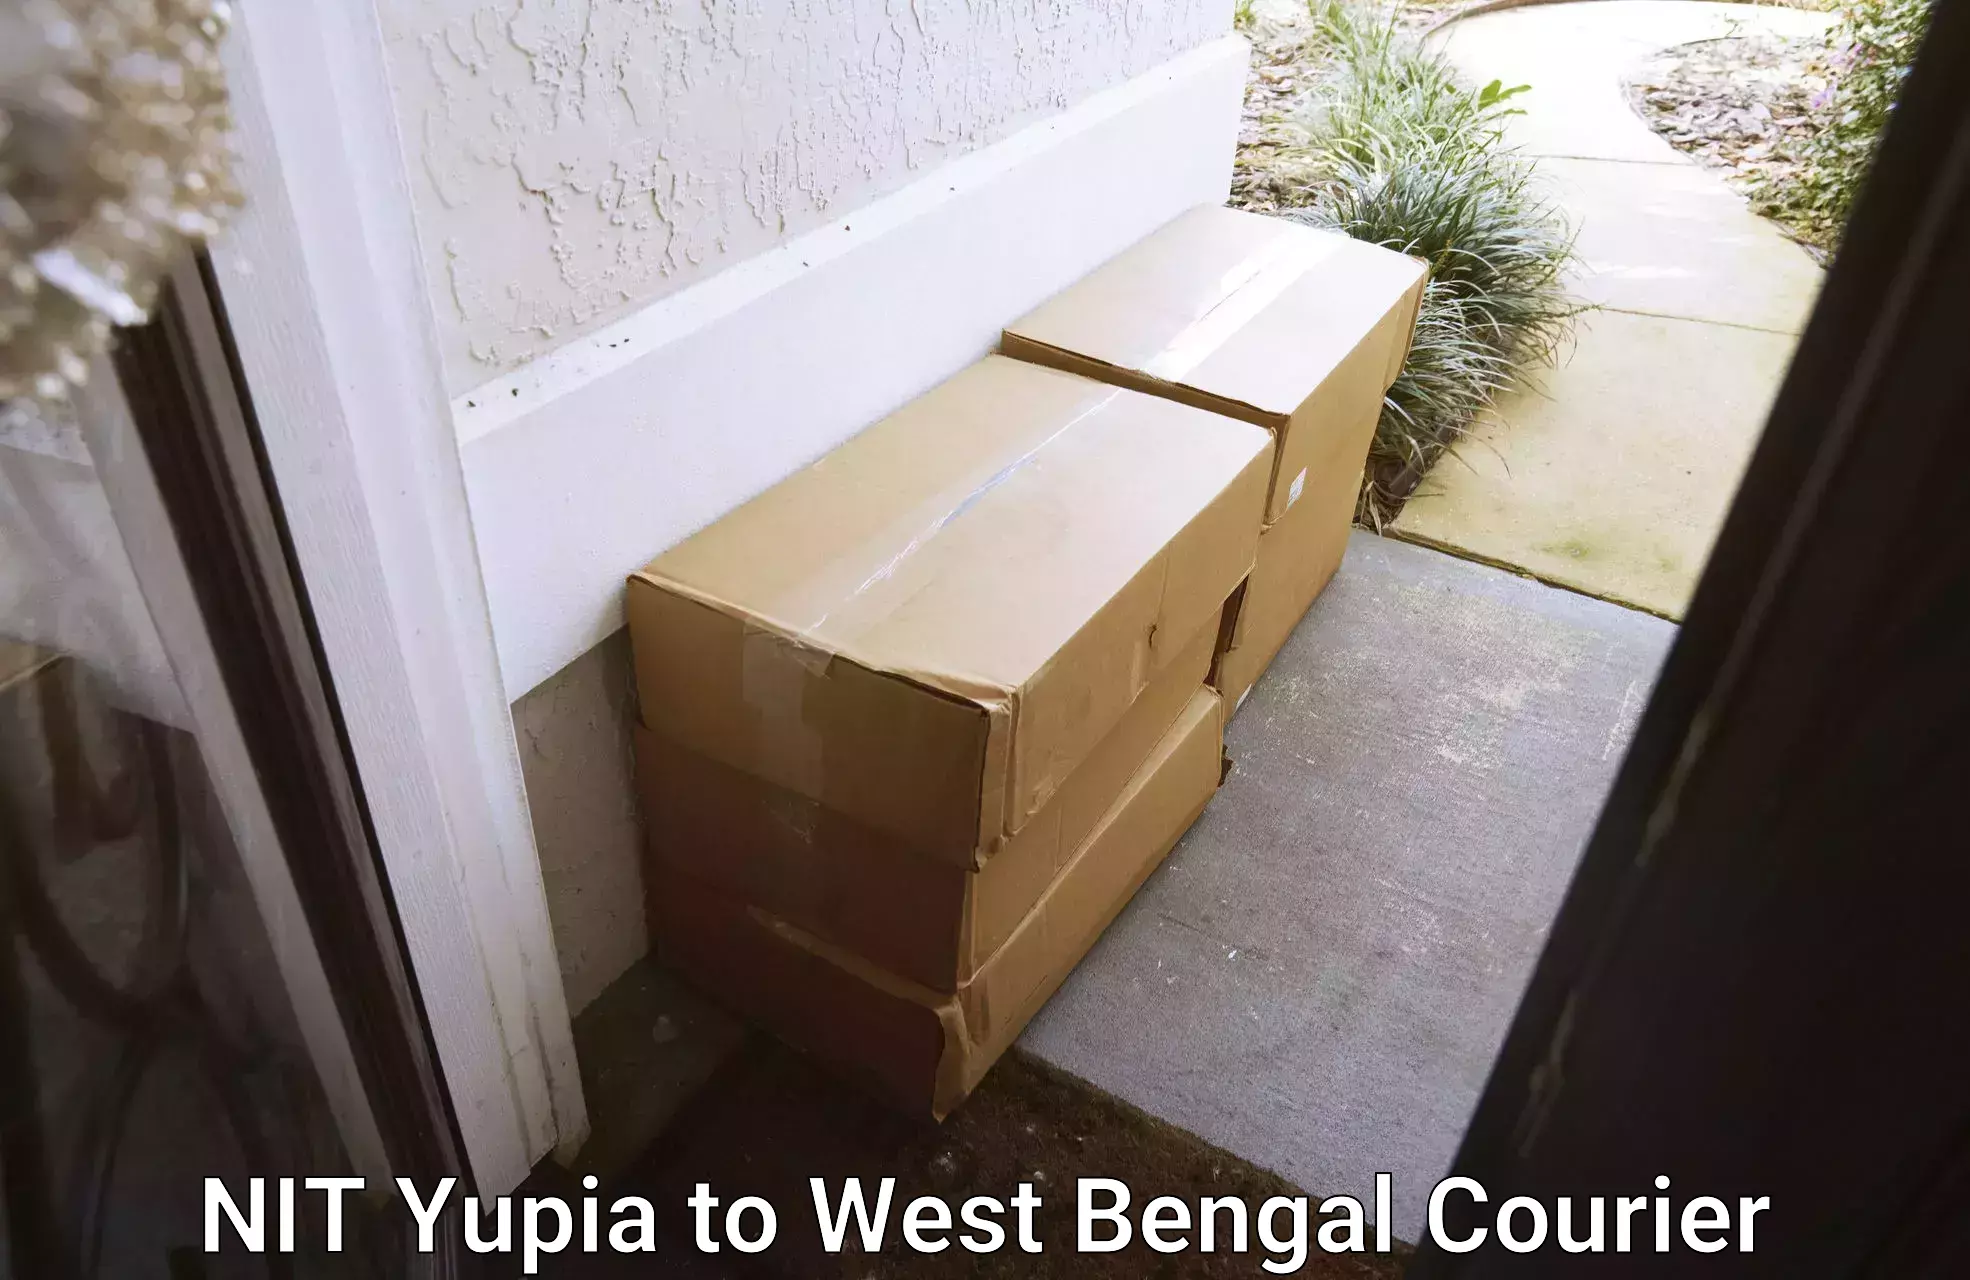 Parcel service for businesses in NIT Yupia to Ennore